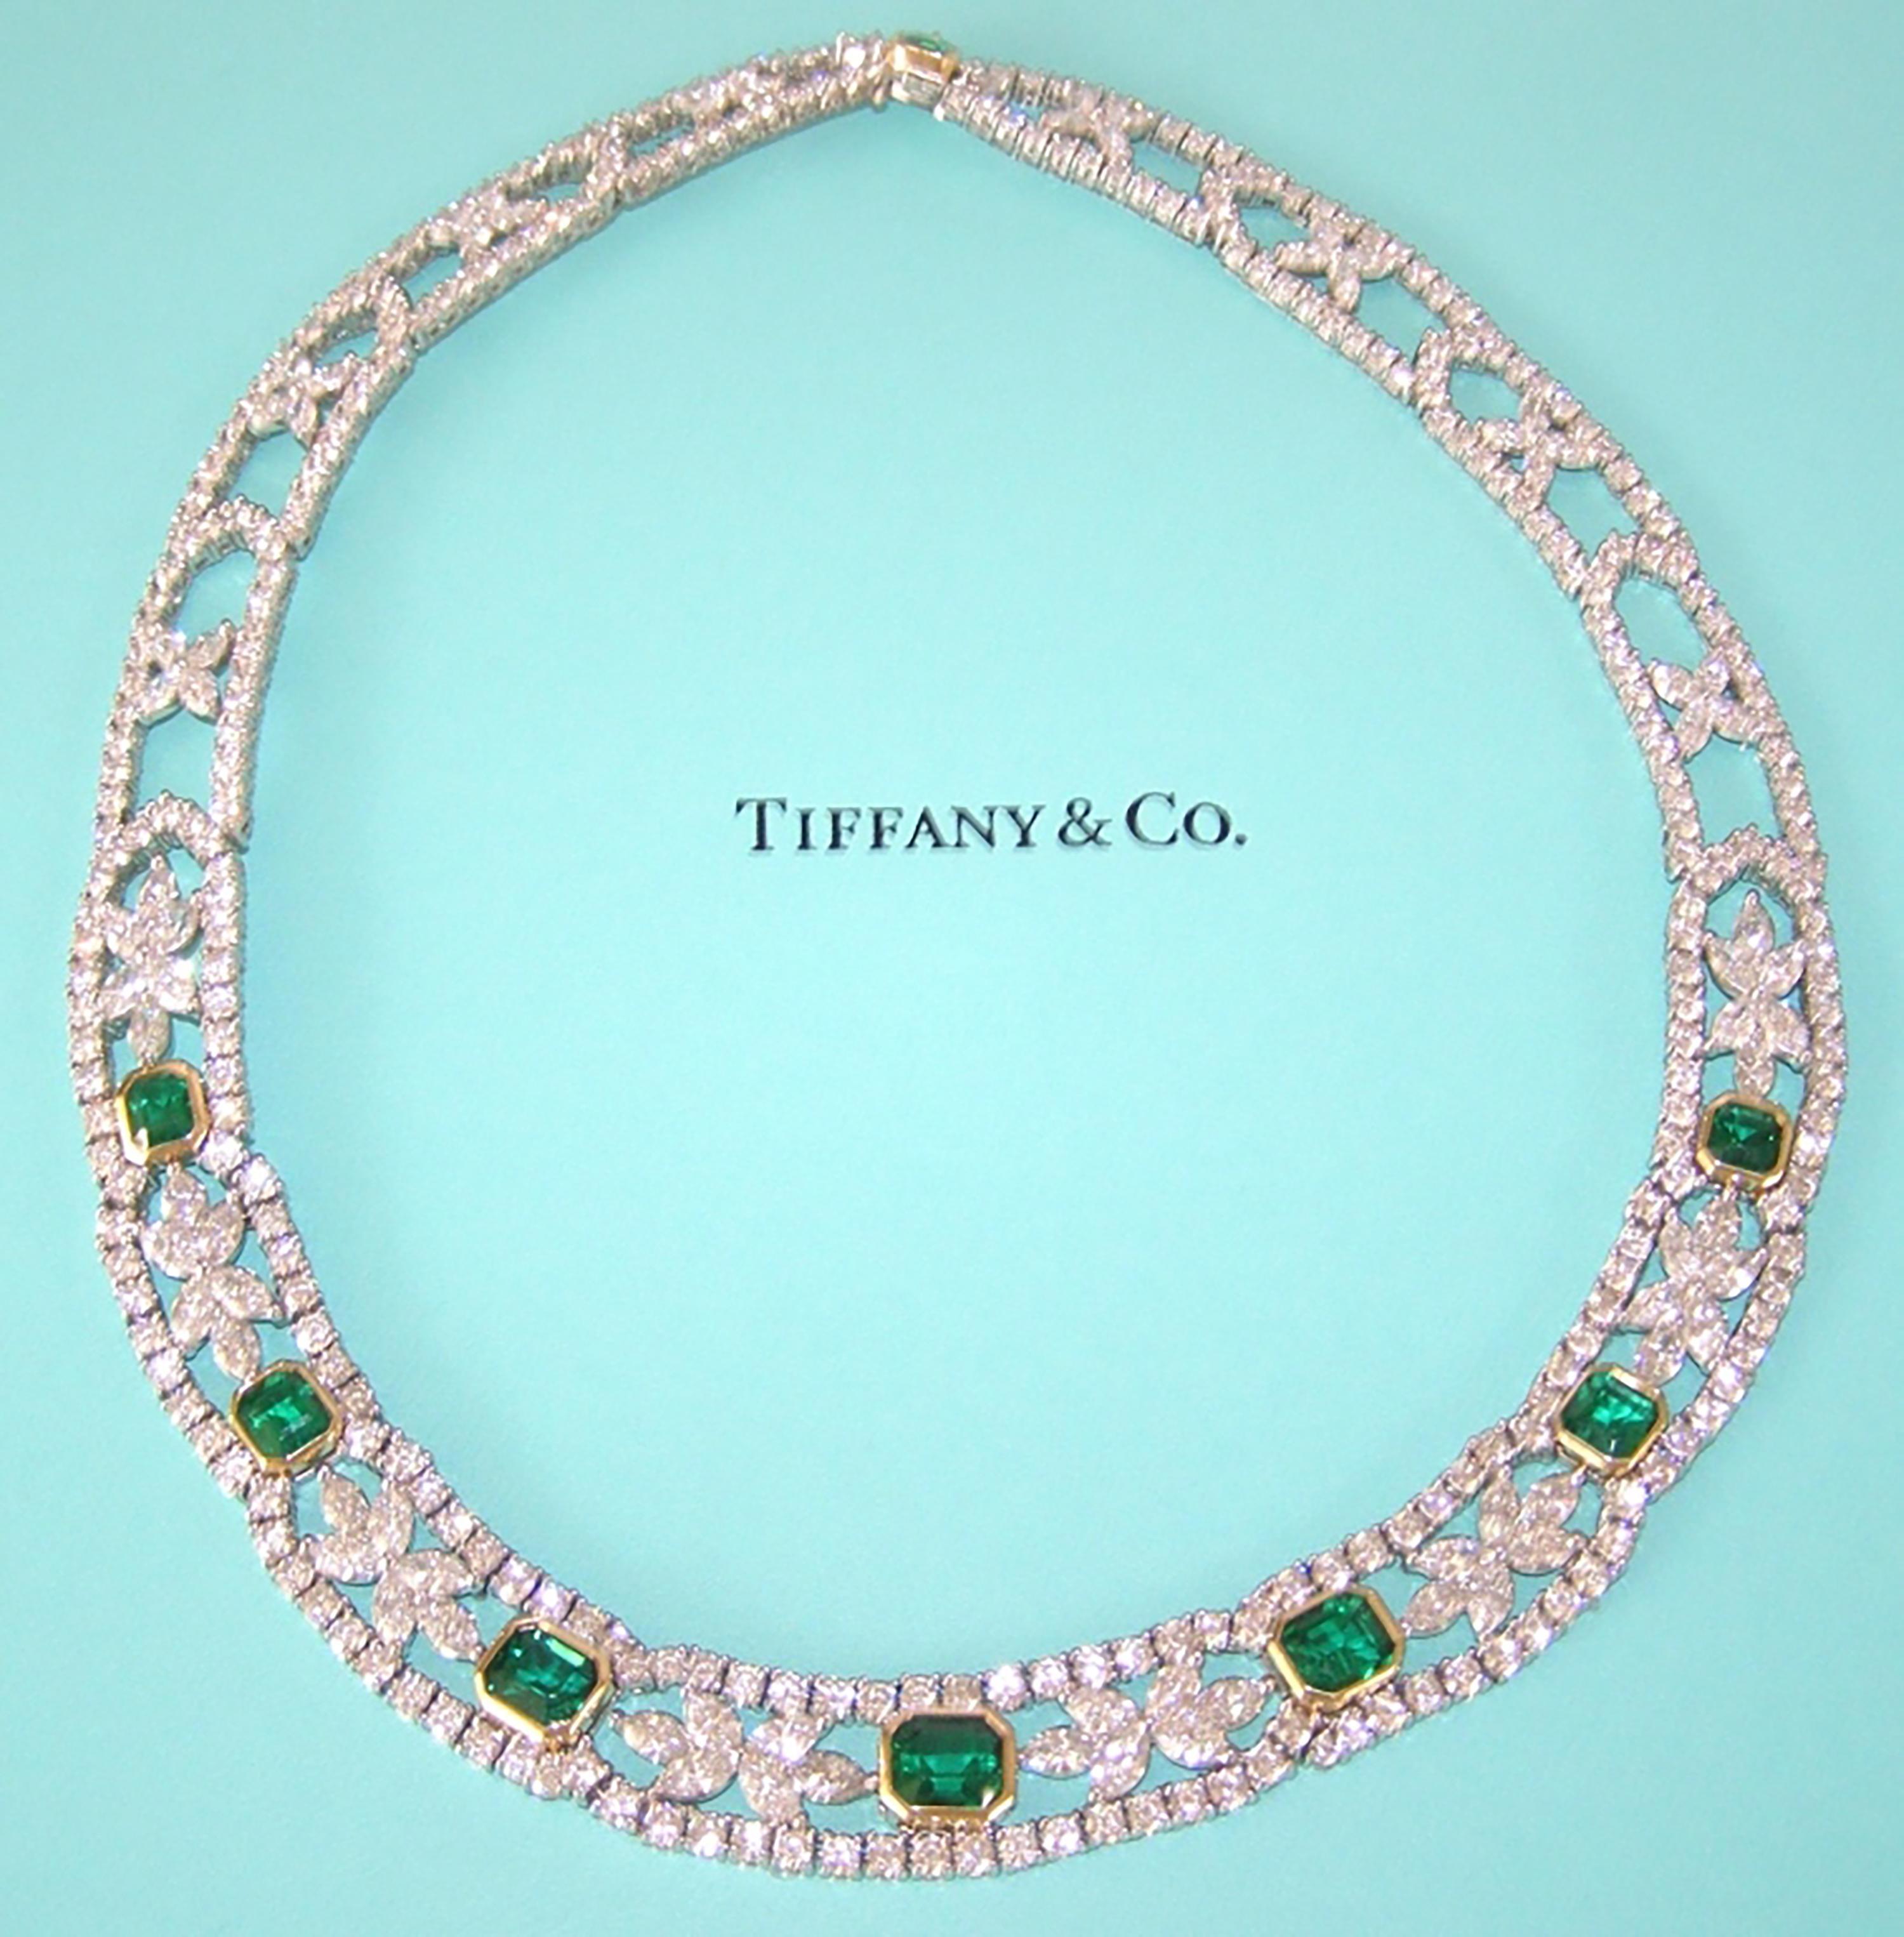 Presenting The Tiffany & Co Tsarina Necklace ~ An Important Tiffany & Co Platinum and 18k Yellow Gold Emerald Diamond Necklace ~ Emeralds, Round Brilliant Cut Diamonds, Marquise Brilliant Cut Diamonds, Pear Brilliant Cut Diamonds ~ Approx. 46.16tcw